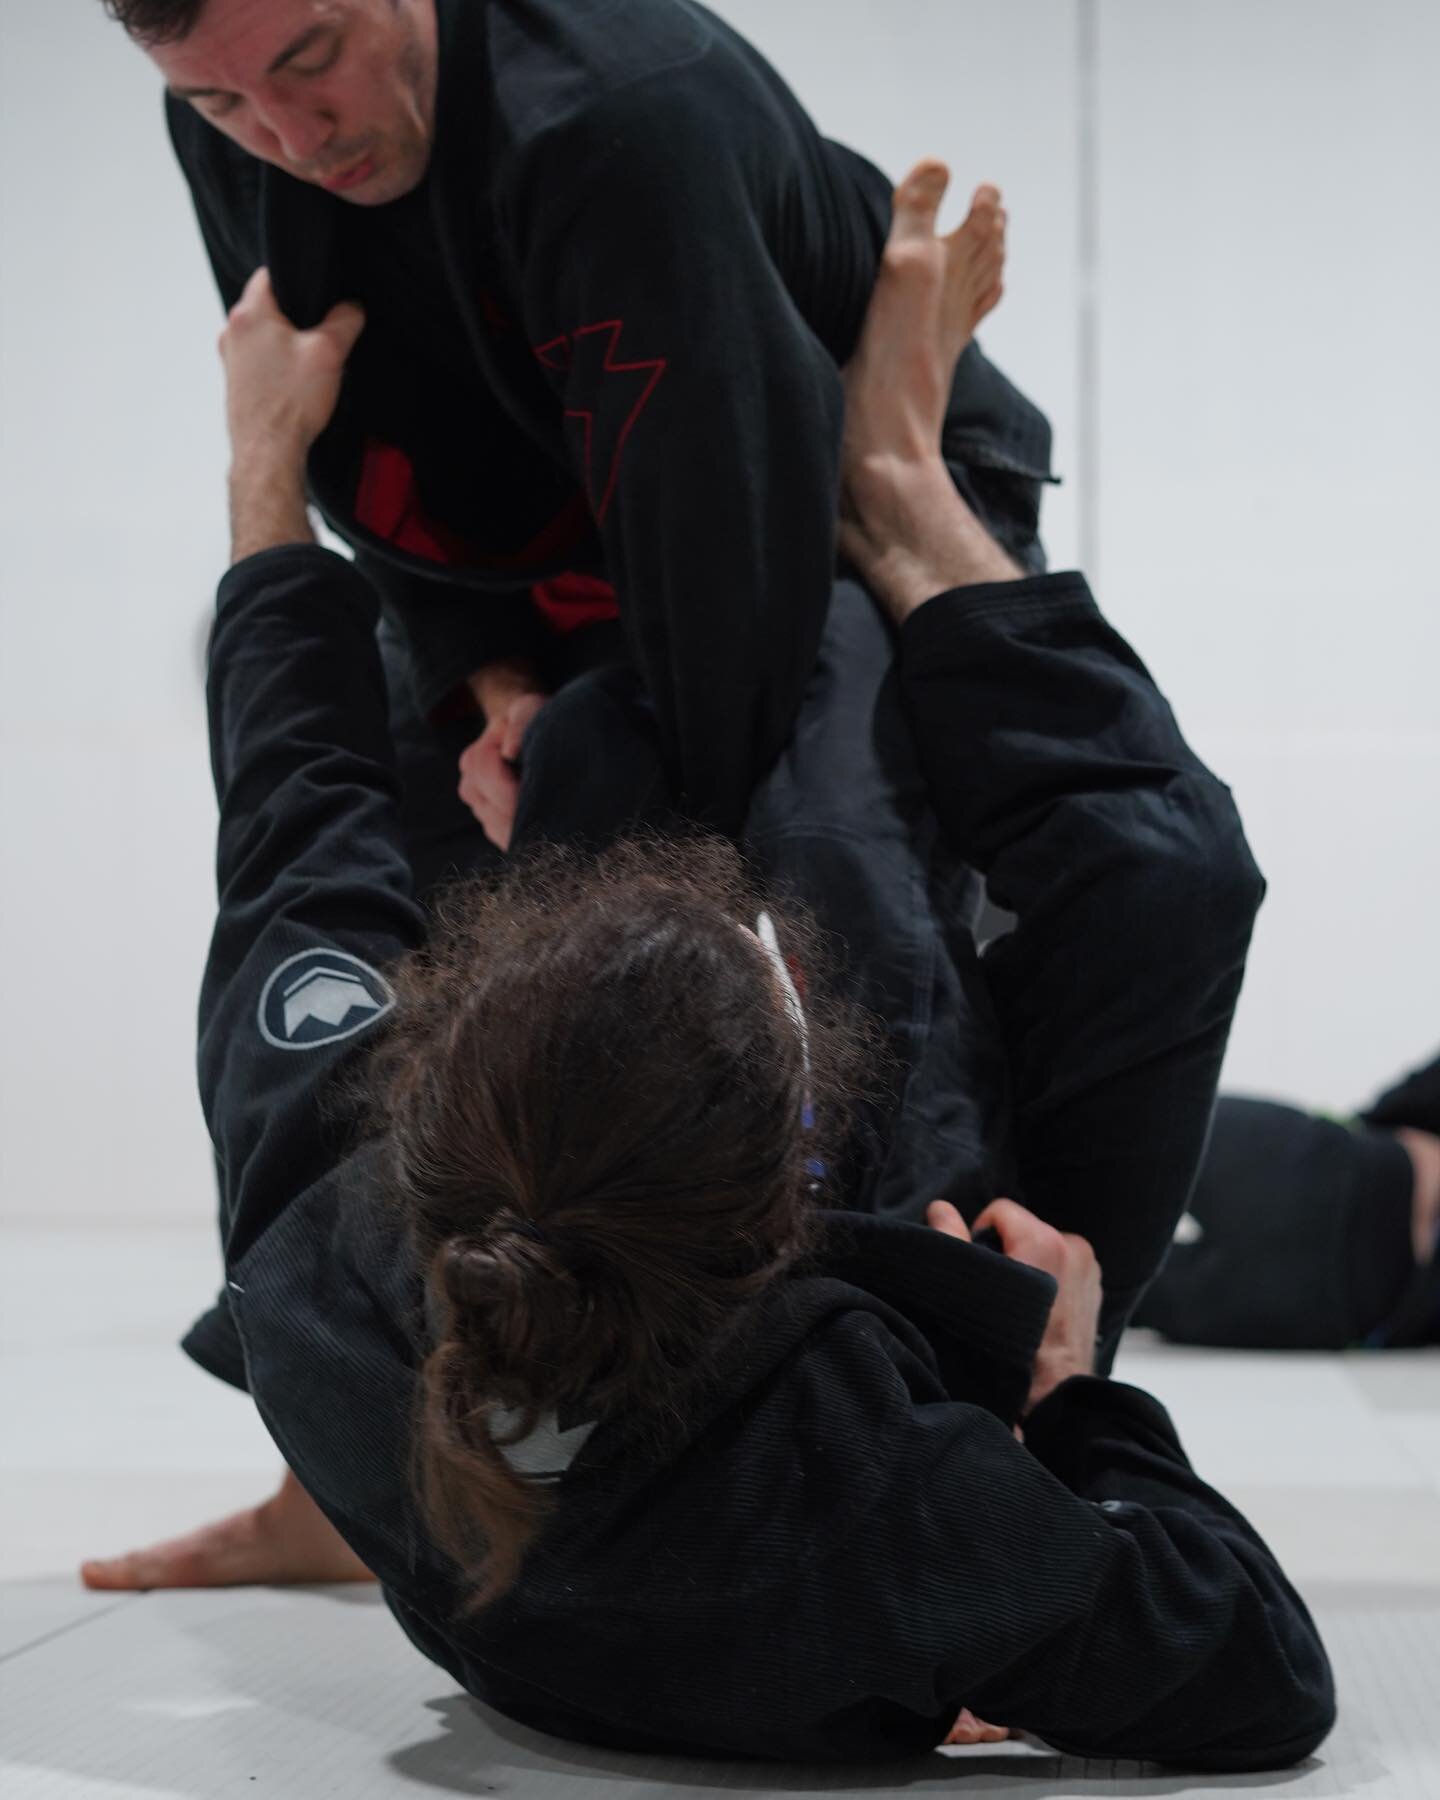 The weather outside might be absolutely terrible, but luckily we chose an indoor sport 😉

See you on the mats! 

#alliancebjj #jiujitsu #rainydays #grind #fitness #memphis